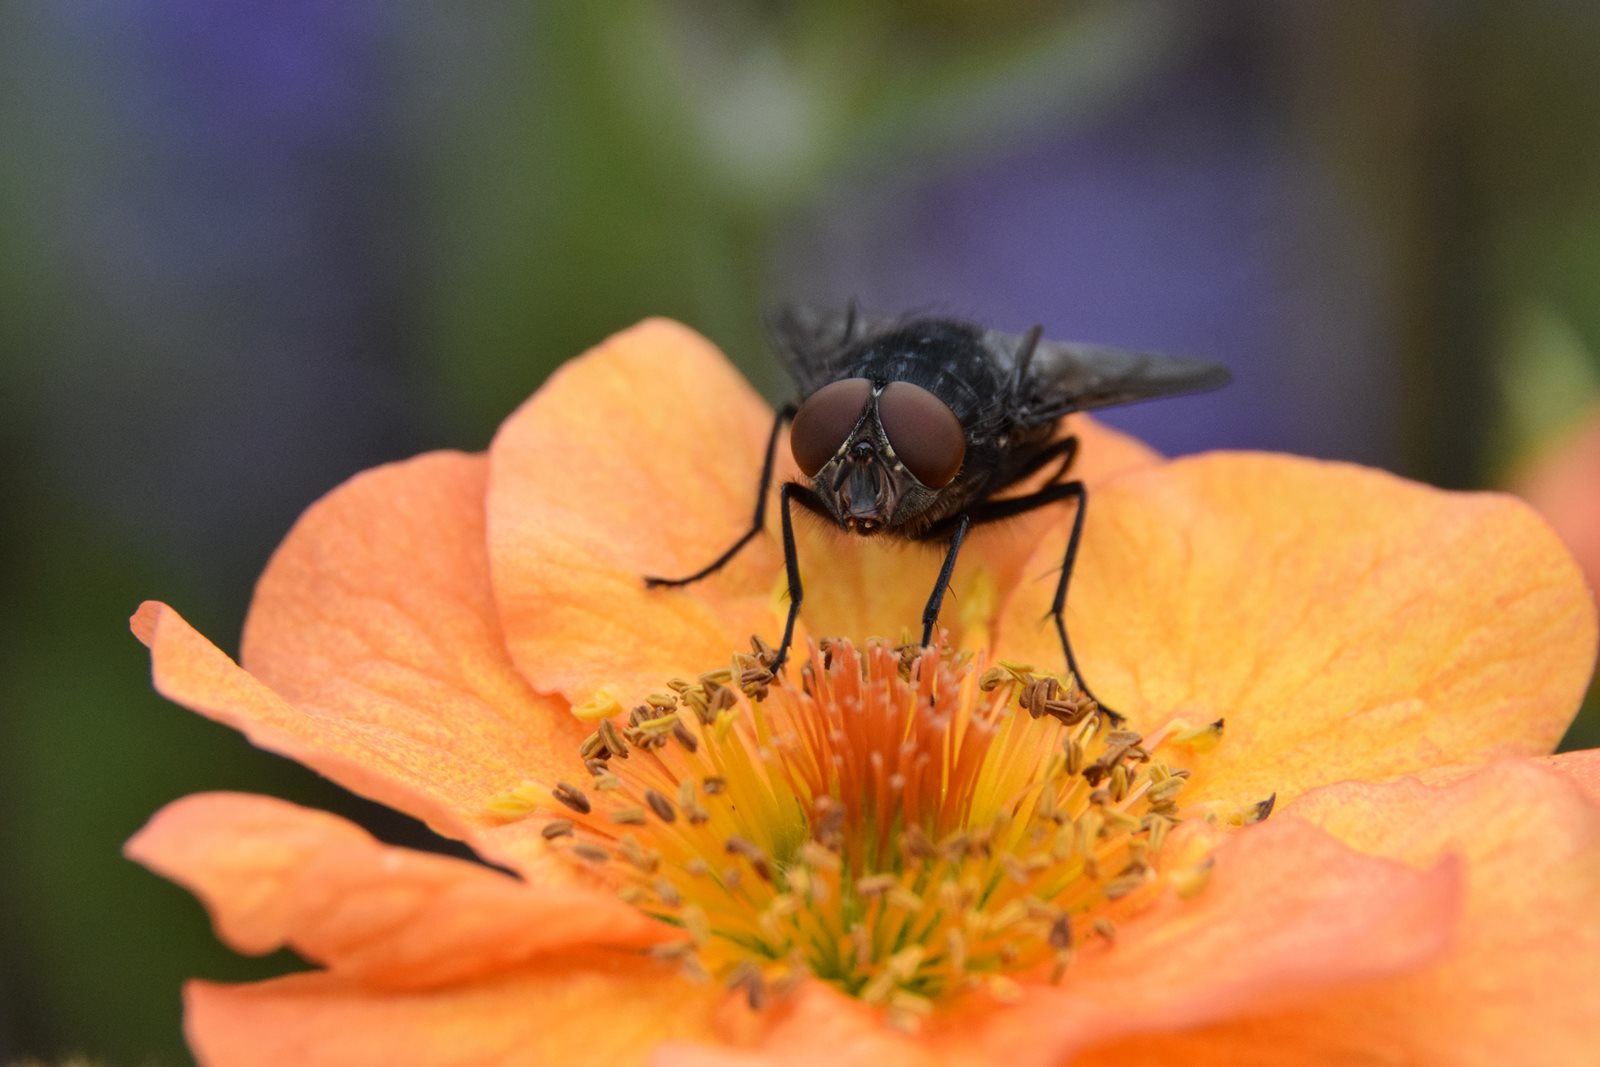 A fly on a flower